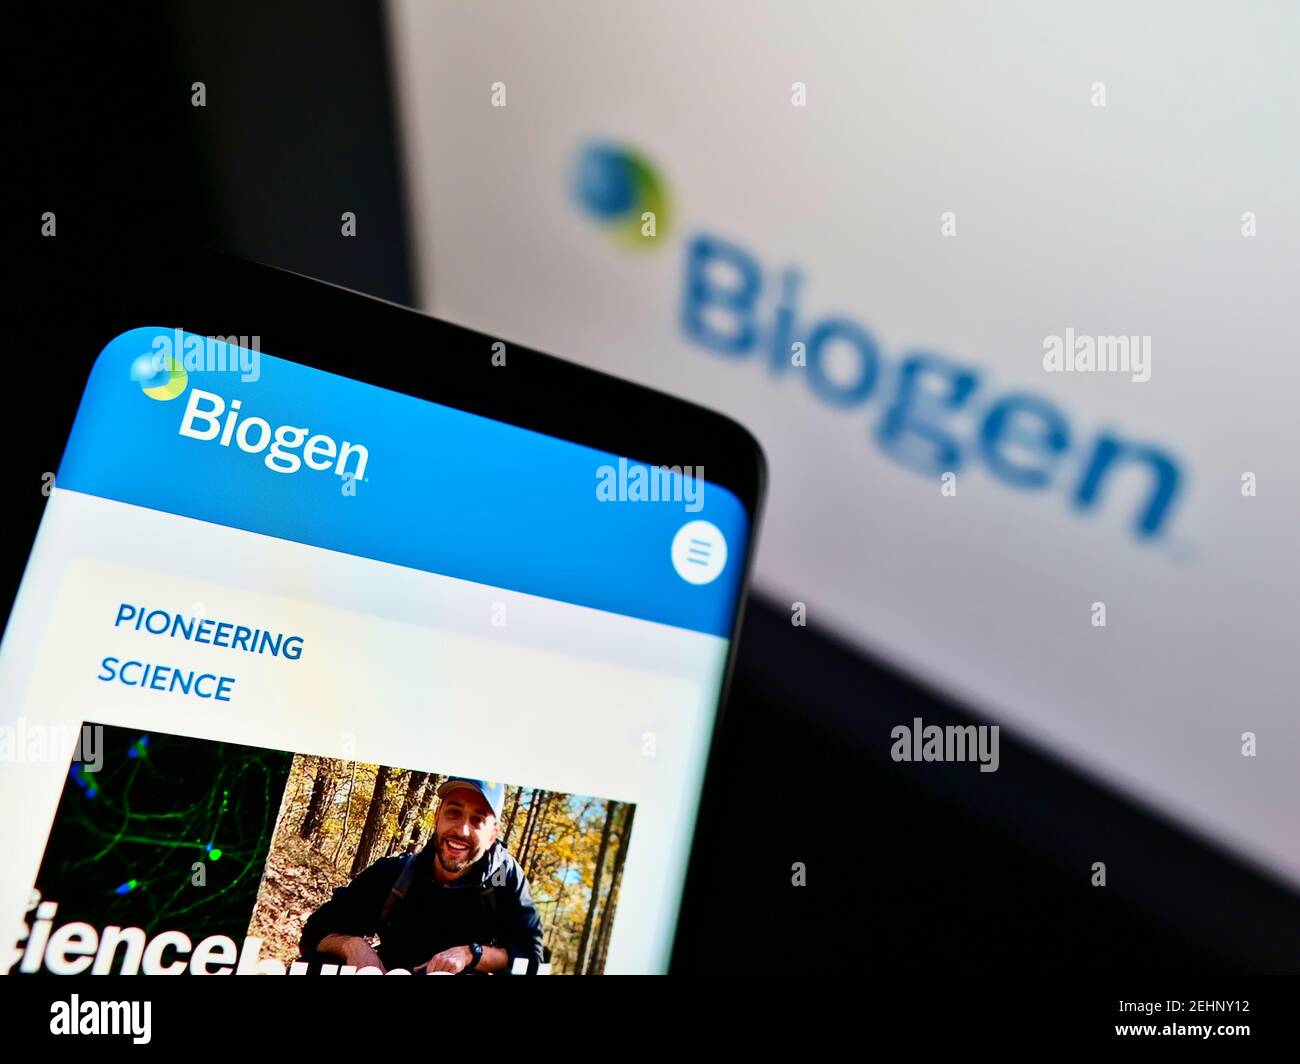 Cellphone with web page of American biotechnology company Biogen Inc. on screen in front of business logo. Focus on top-left of phone display. Stock Photo